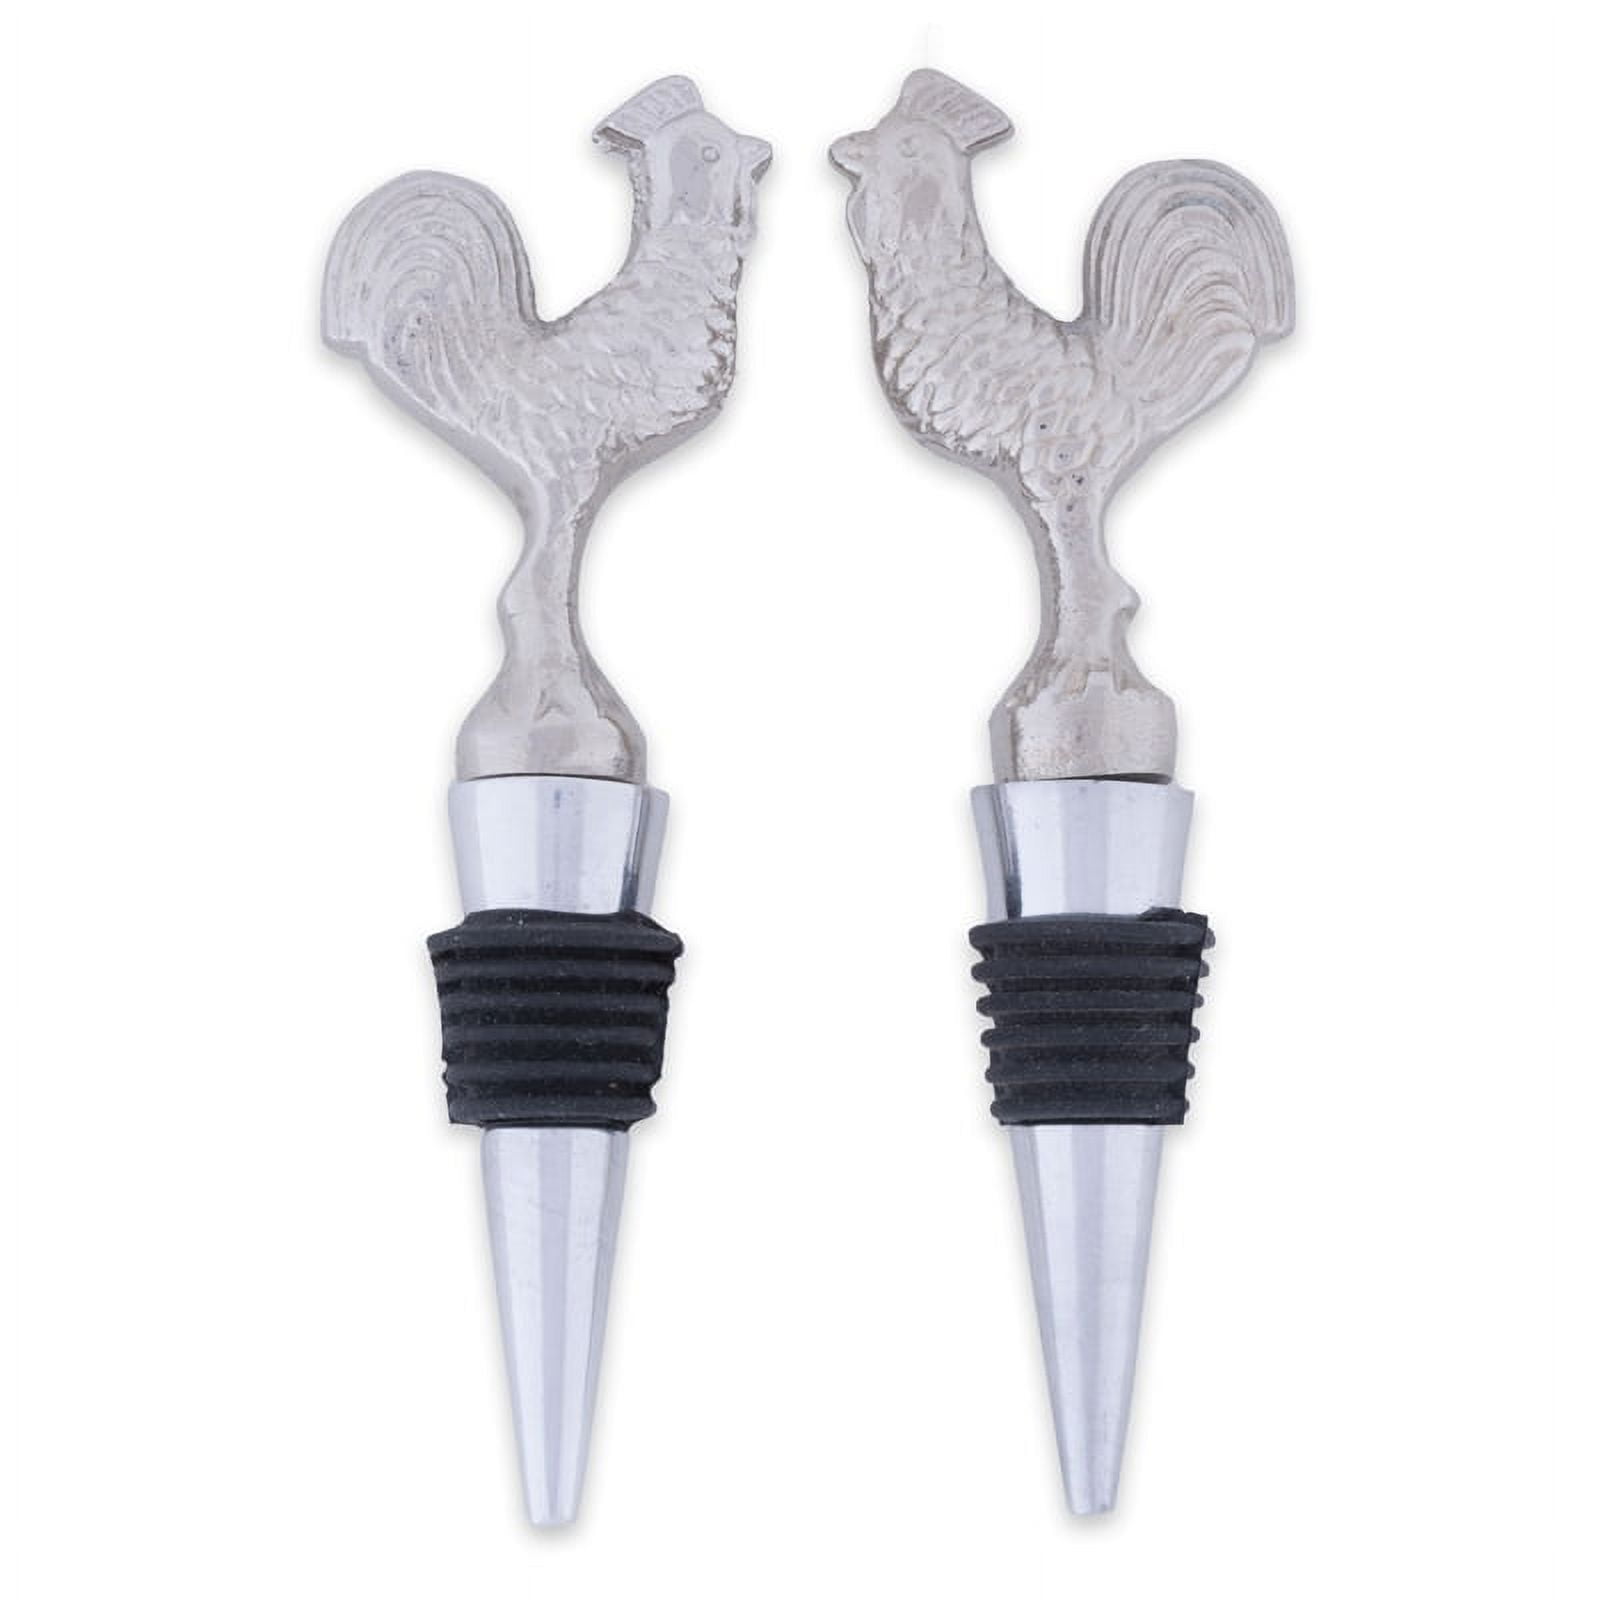 Picture of Design Imports CAMZ10678 Silver Rooster Bottle Stopper - Set of 2